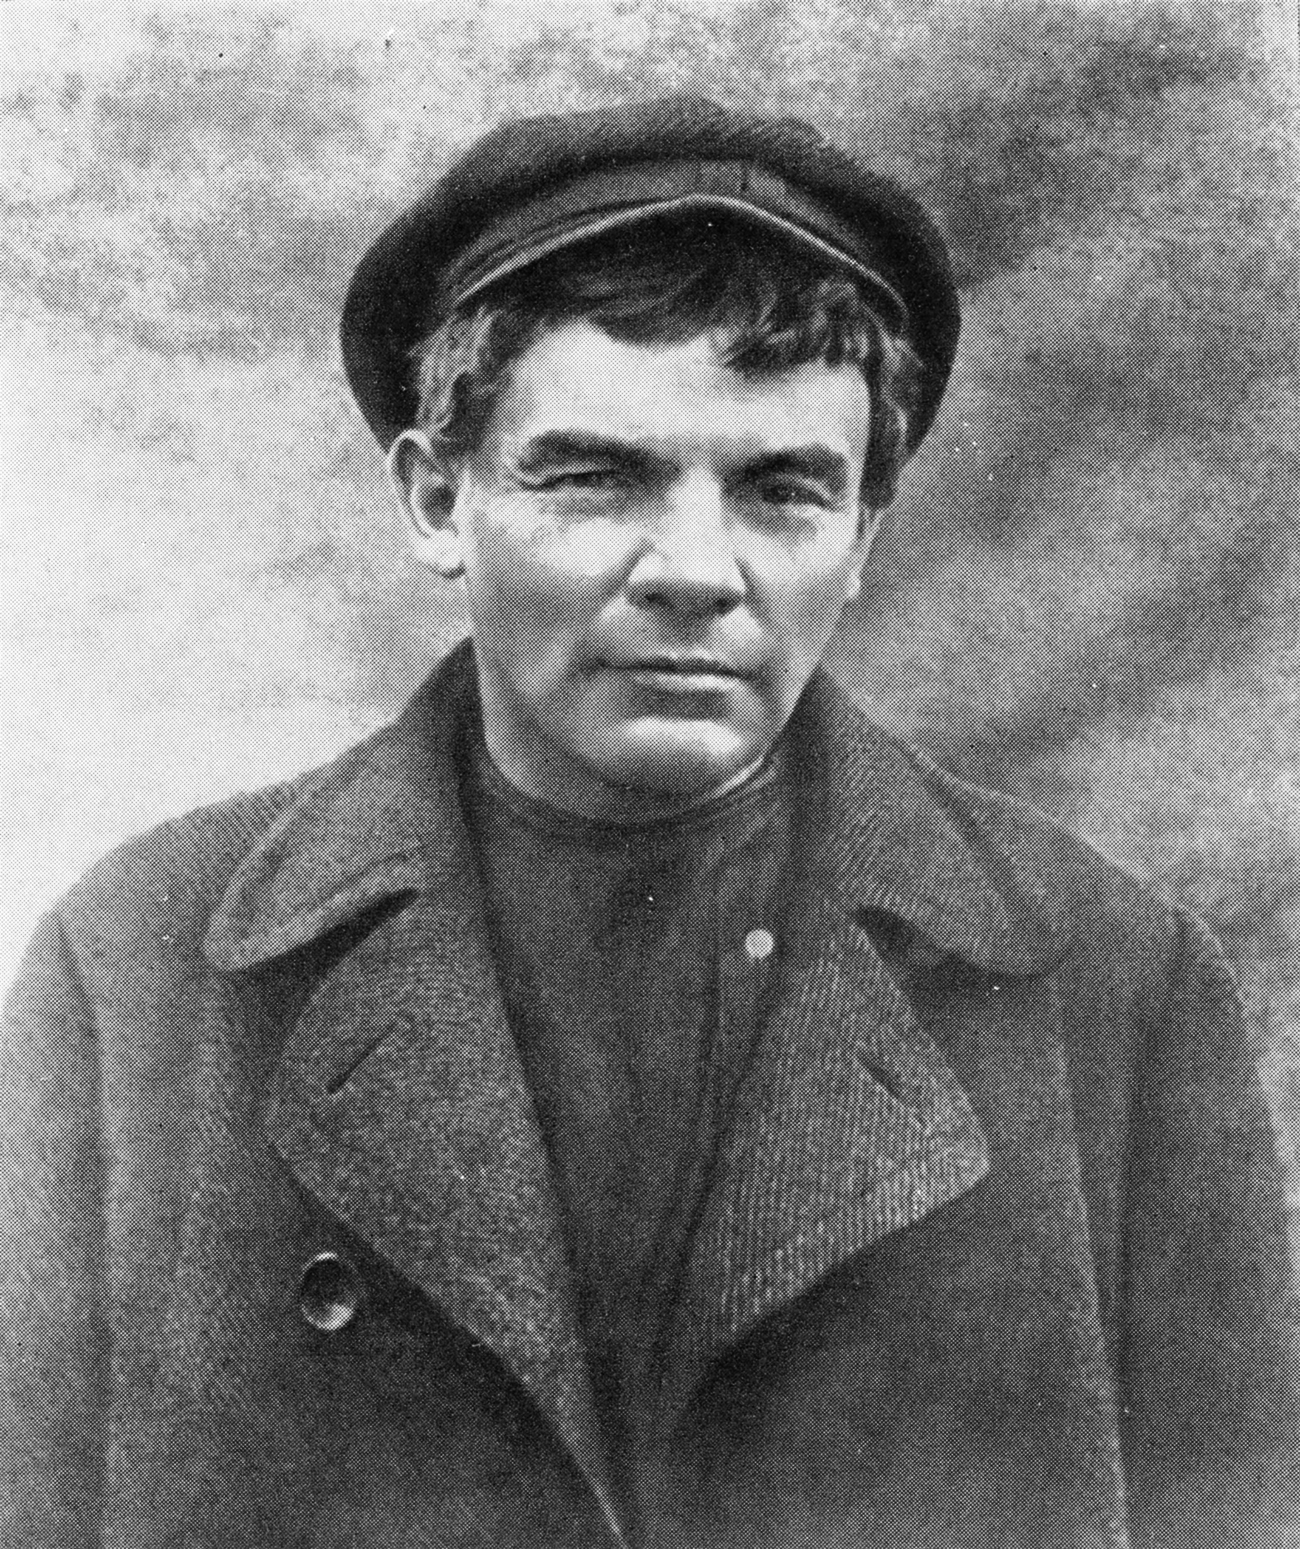 Lenin in disguise-clean-shaven, with a wig on. Dmitry Leshchenko made this photograph on July 29 (August 11, New Style), 1917, in Razliv on Bolshevik Party Central Committee order for a forged identity card on which the Bolshevik leader fled to Finland under the name of Ivanov, Sestroretsk Arms Works employee. / Photo: Mary Evans/Global Look Press